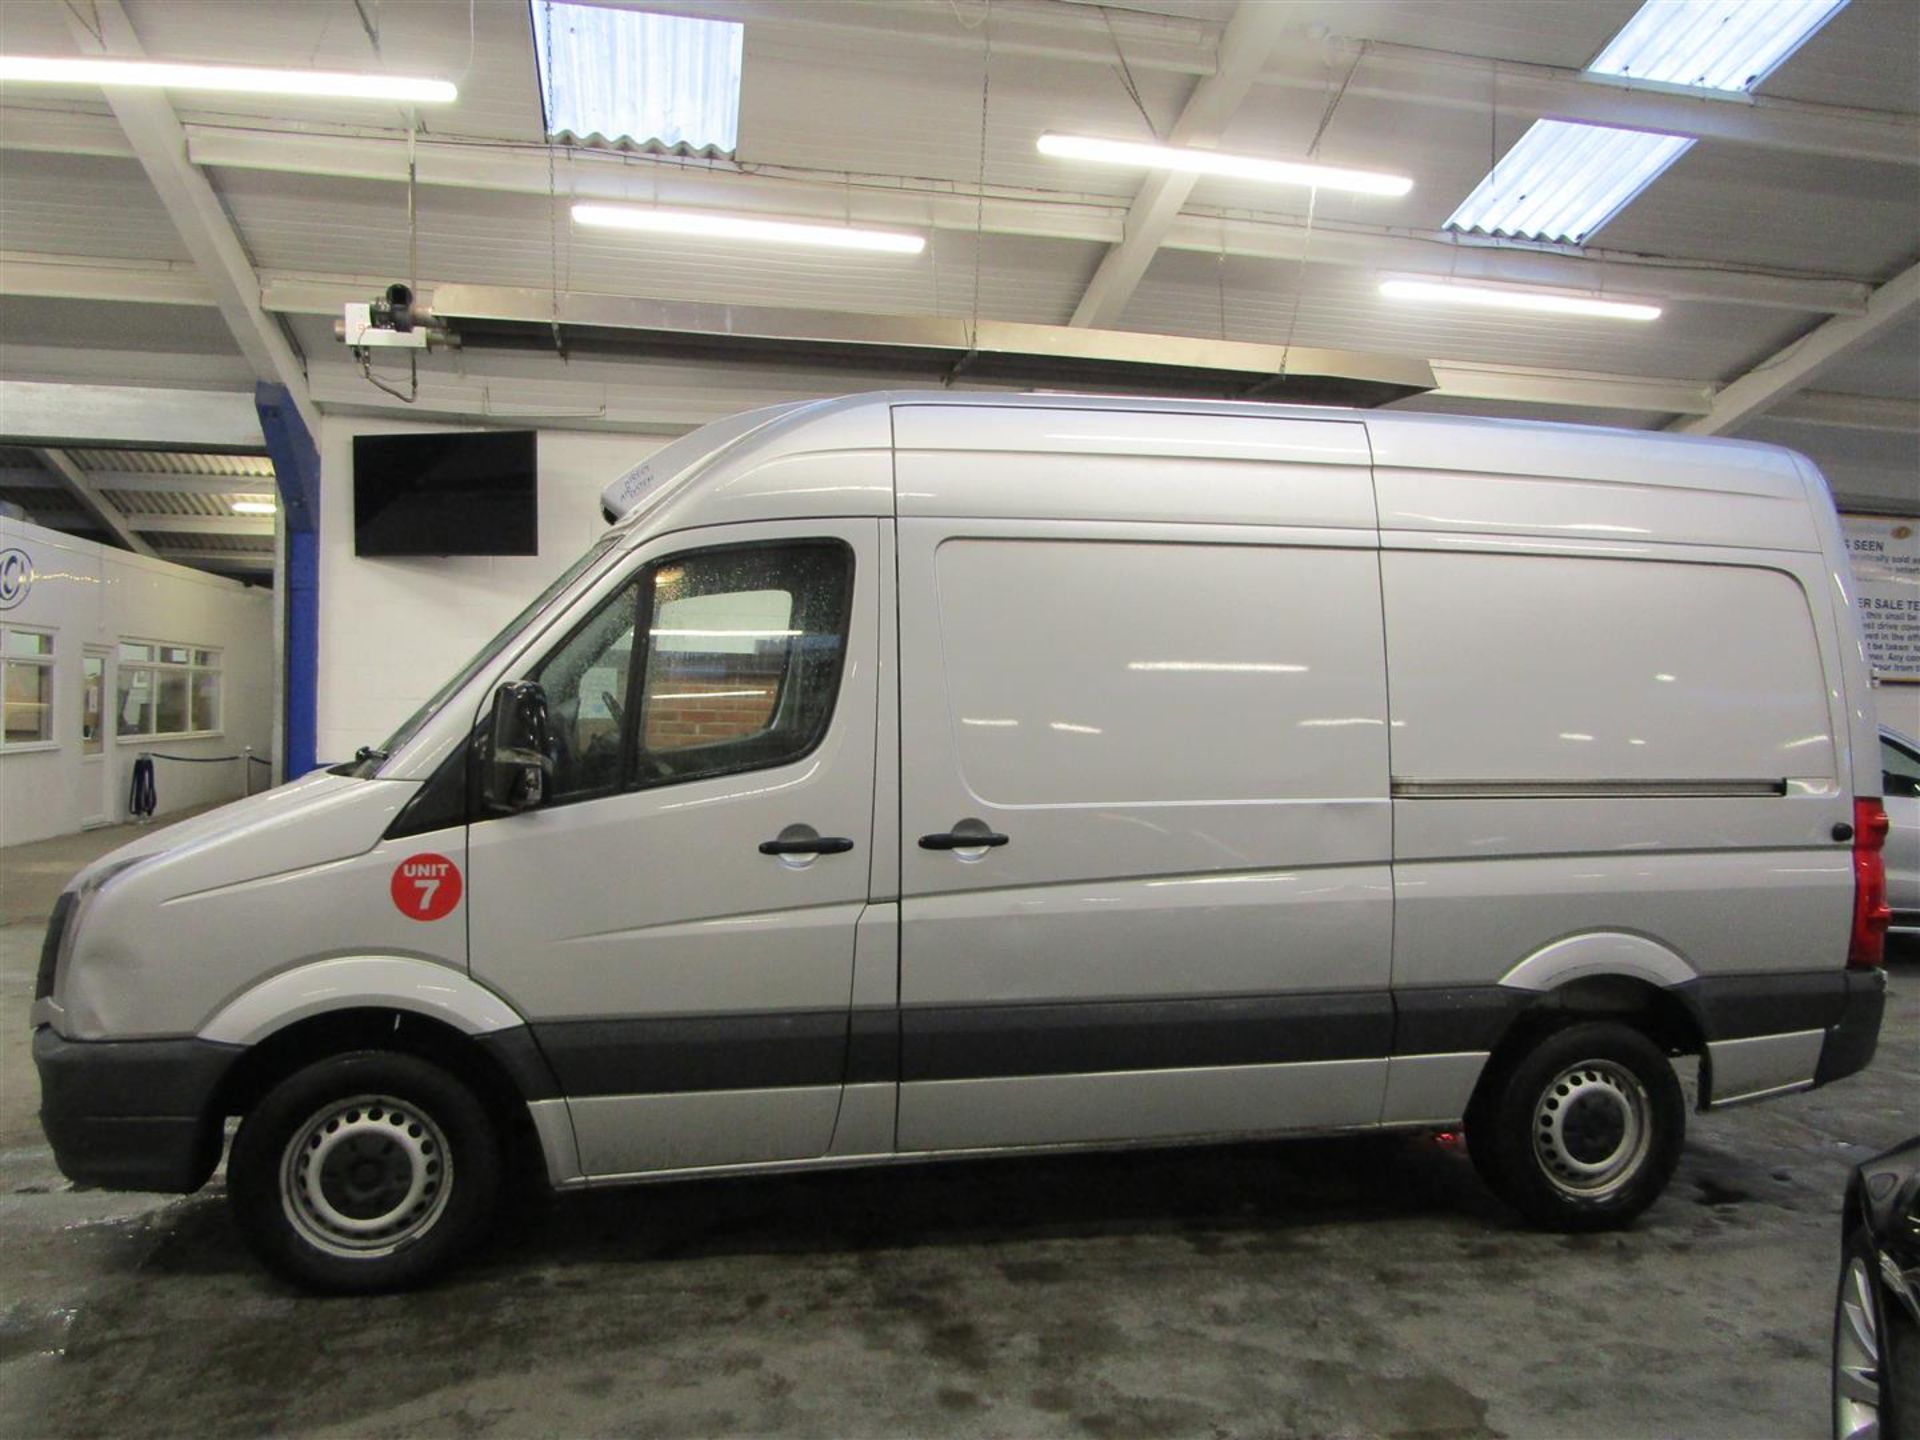 15 15 VW Crafter CR35 TDi - Image 3 of 27